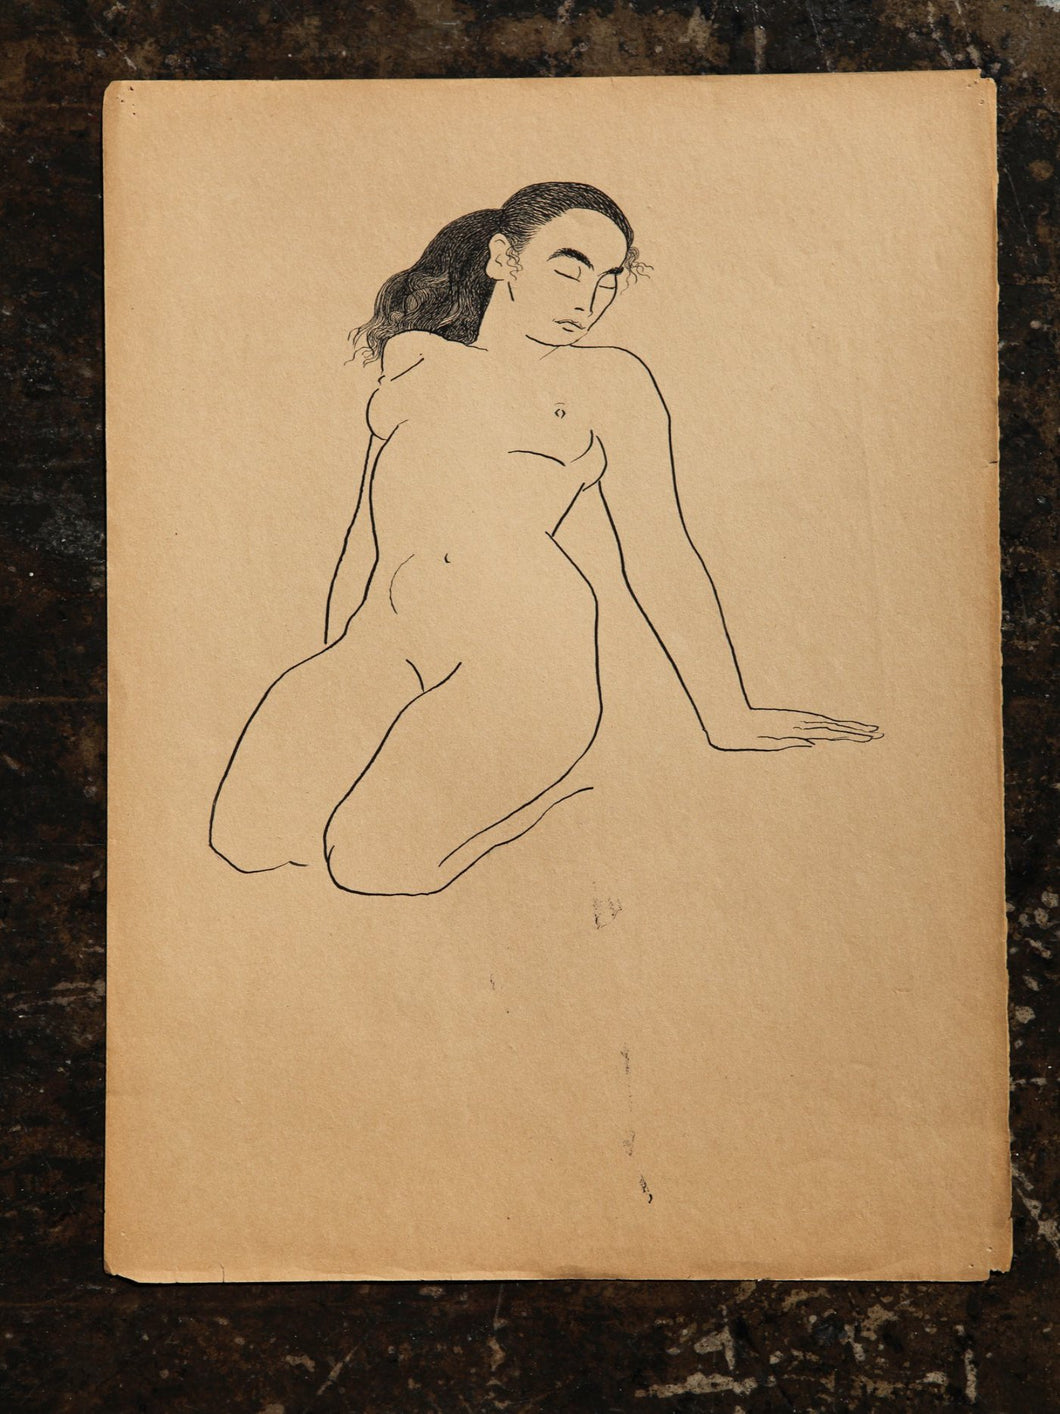 Jerry O'Day Nude Drawing C